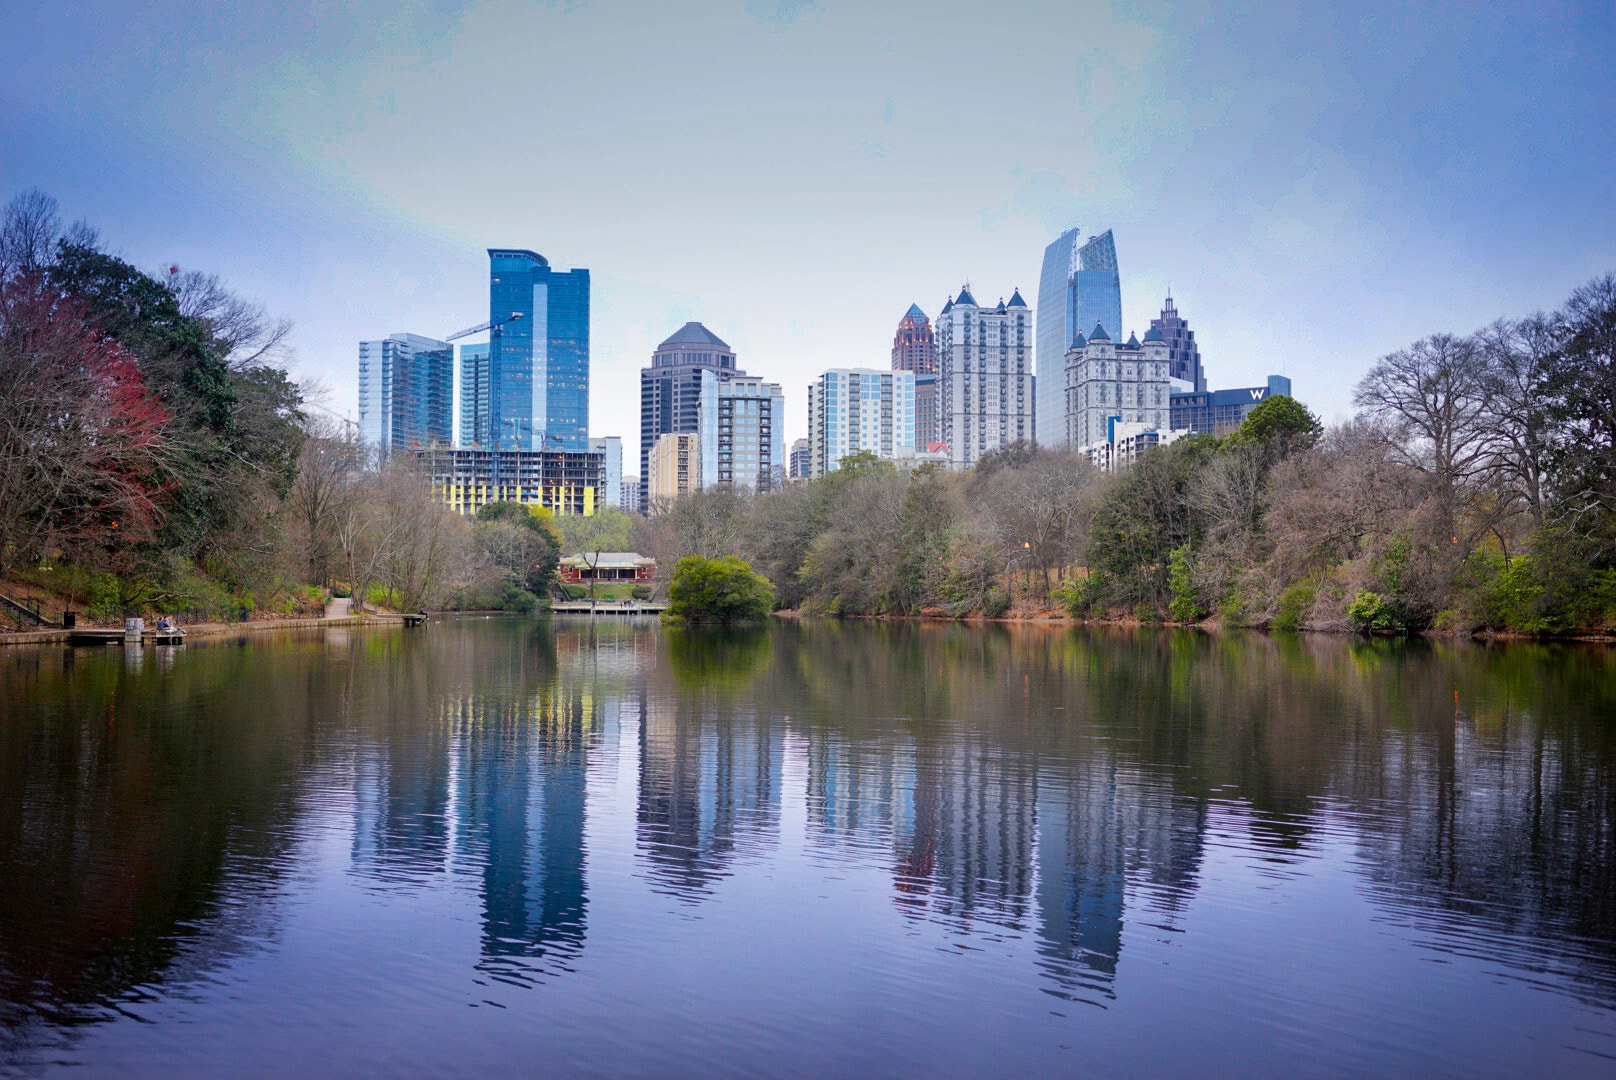 Sony a7 II sample photo. Piedmont park mirror reflections on lake clara meer photography